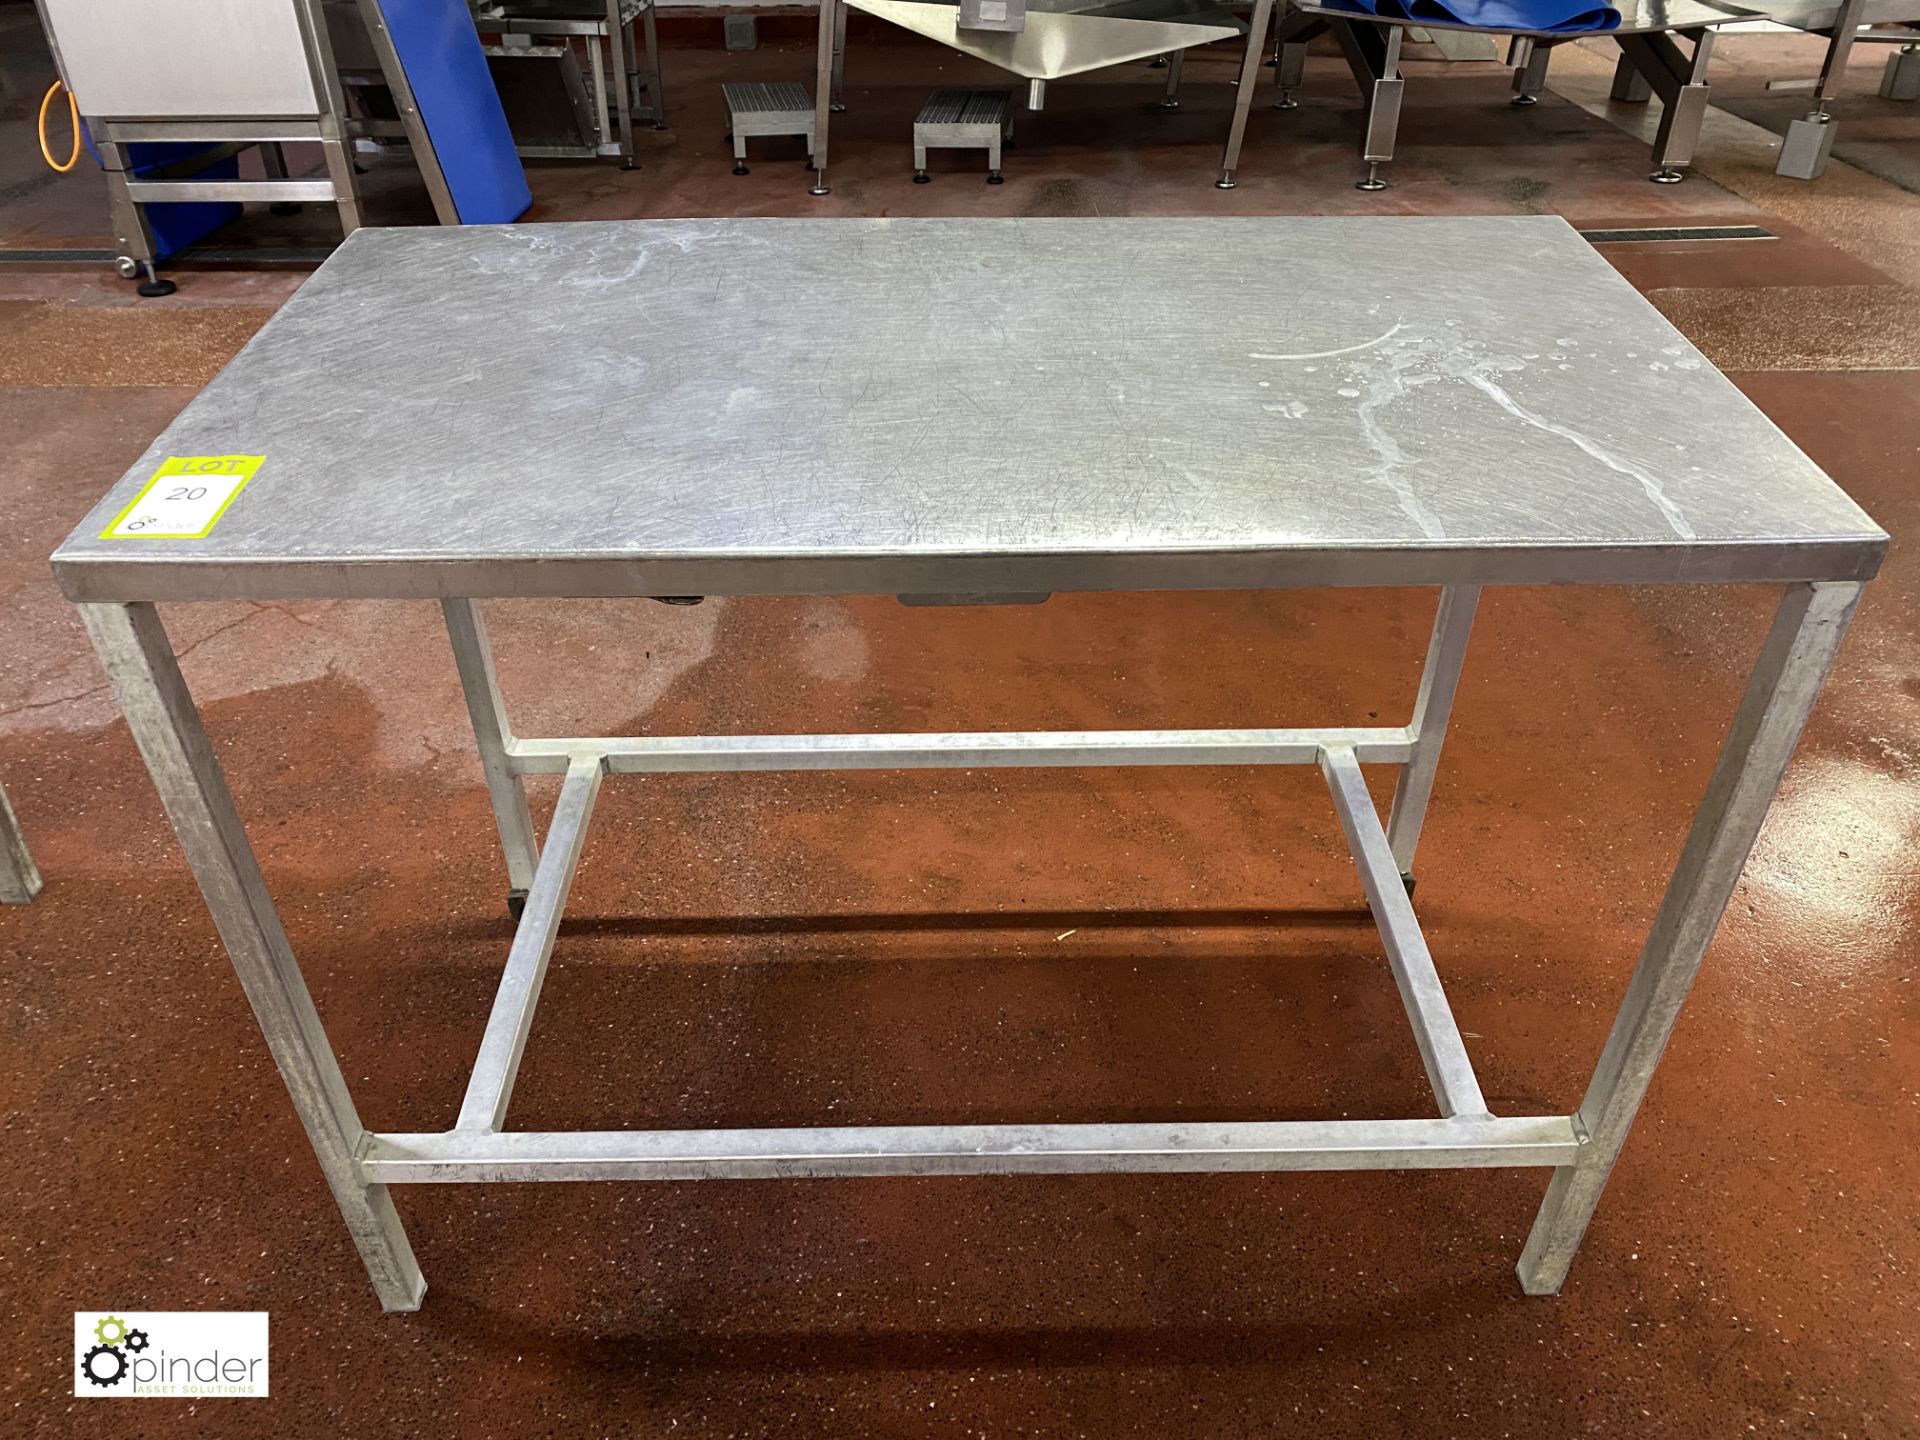 Stainless steel Preparation Table, 1140mm x 600mm x 840mm high (please note there is a lift out